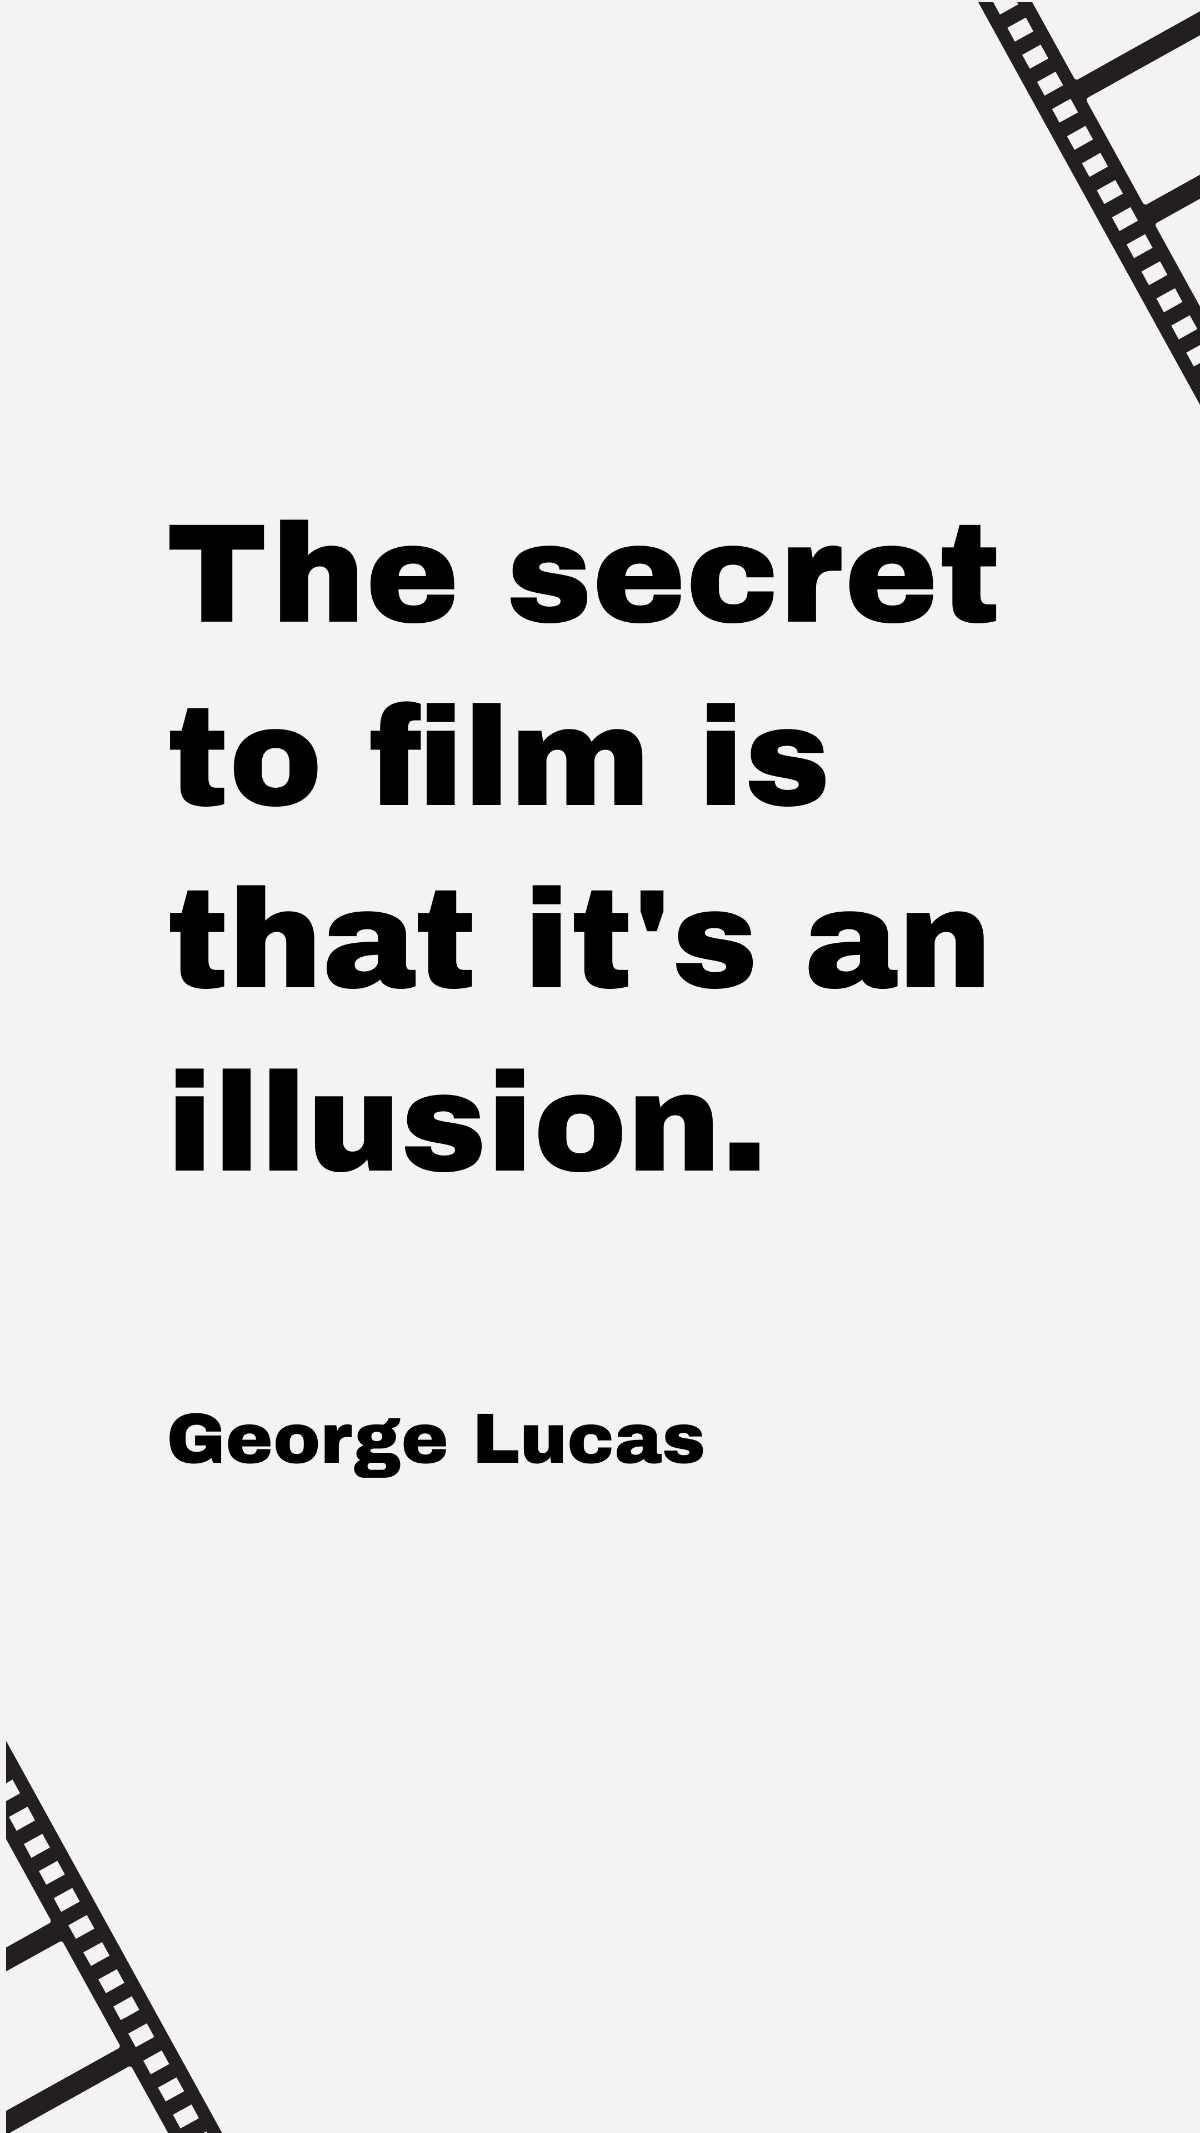 George Lucas - The secret to film is that it's an illusion. Template